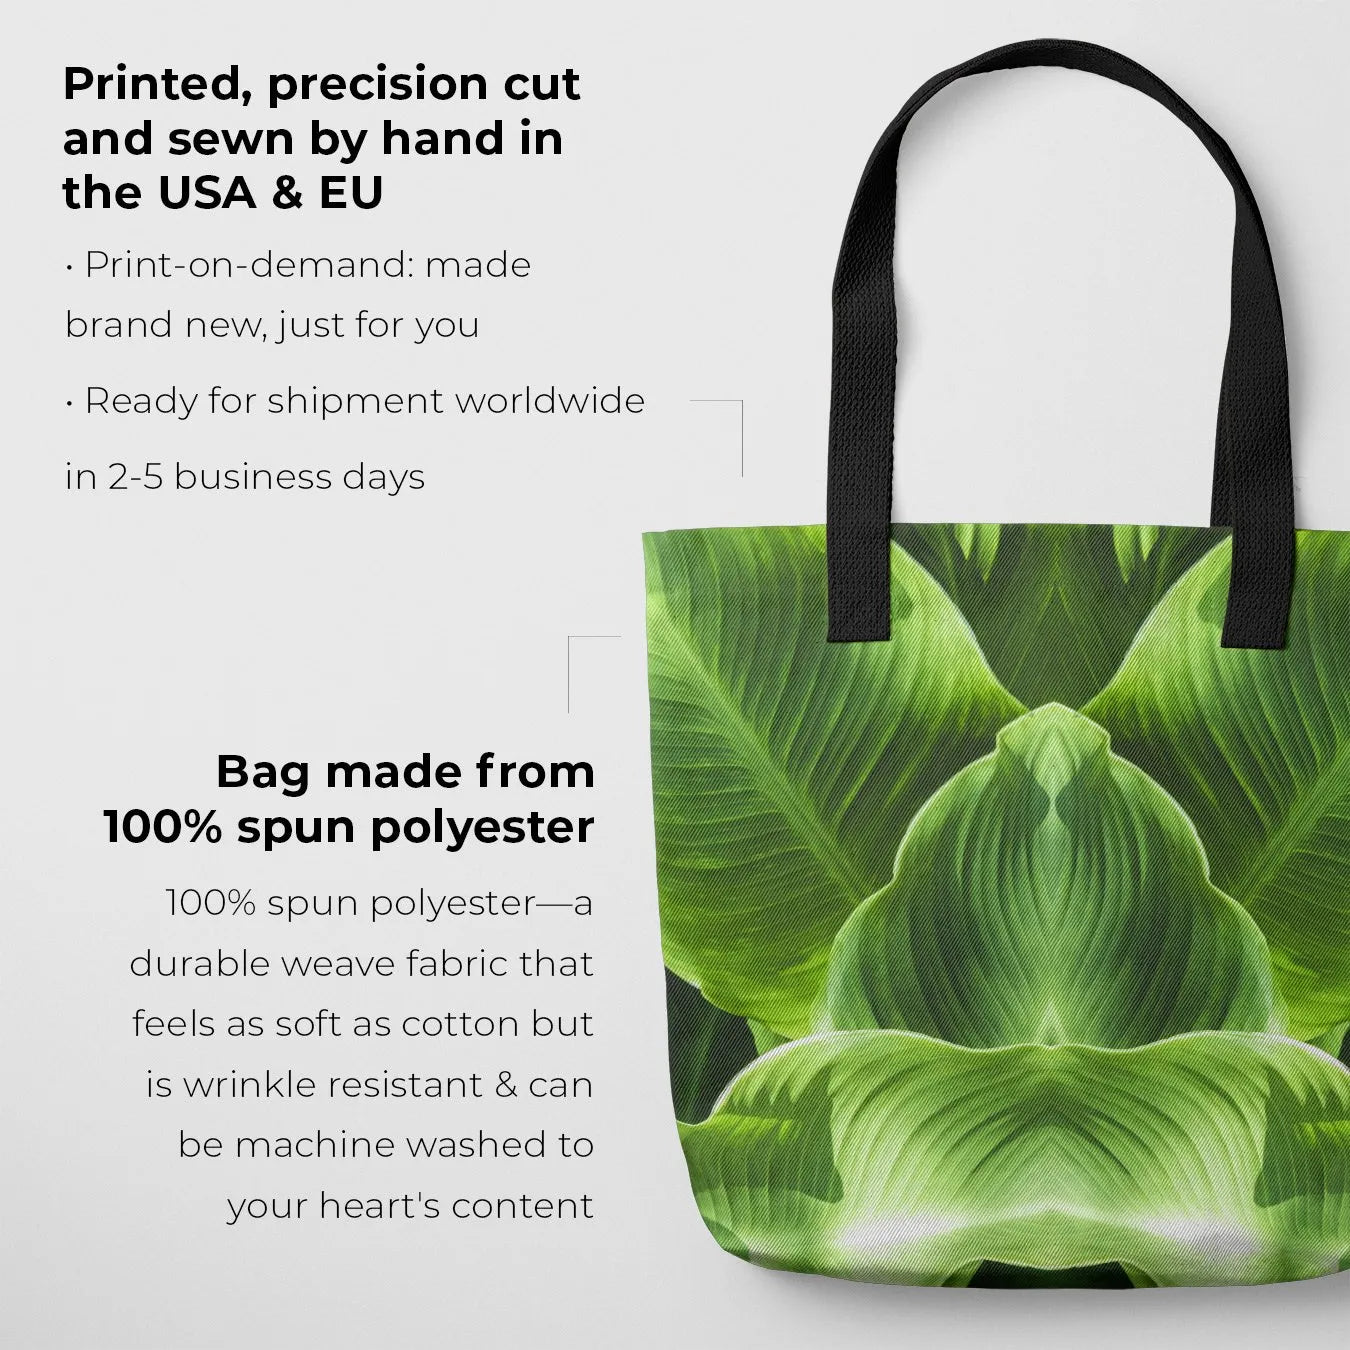 Step By Step Tote - Heavy Duty Reusable Grocery Bag - Shopping Totes - Aesthetic Art